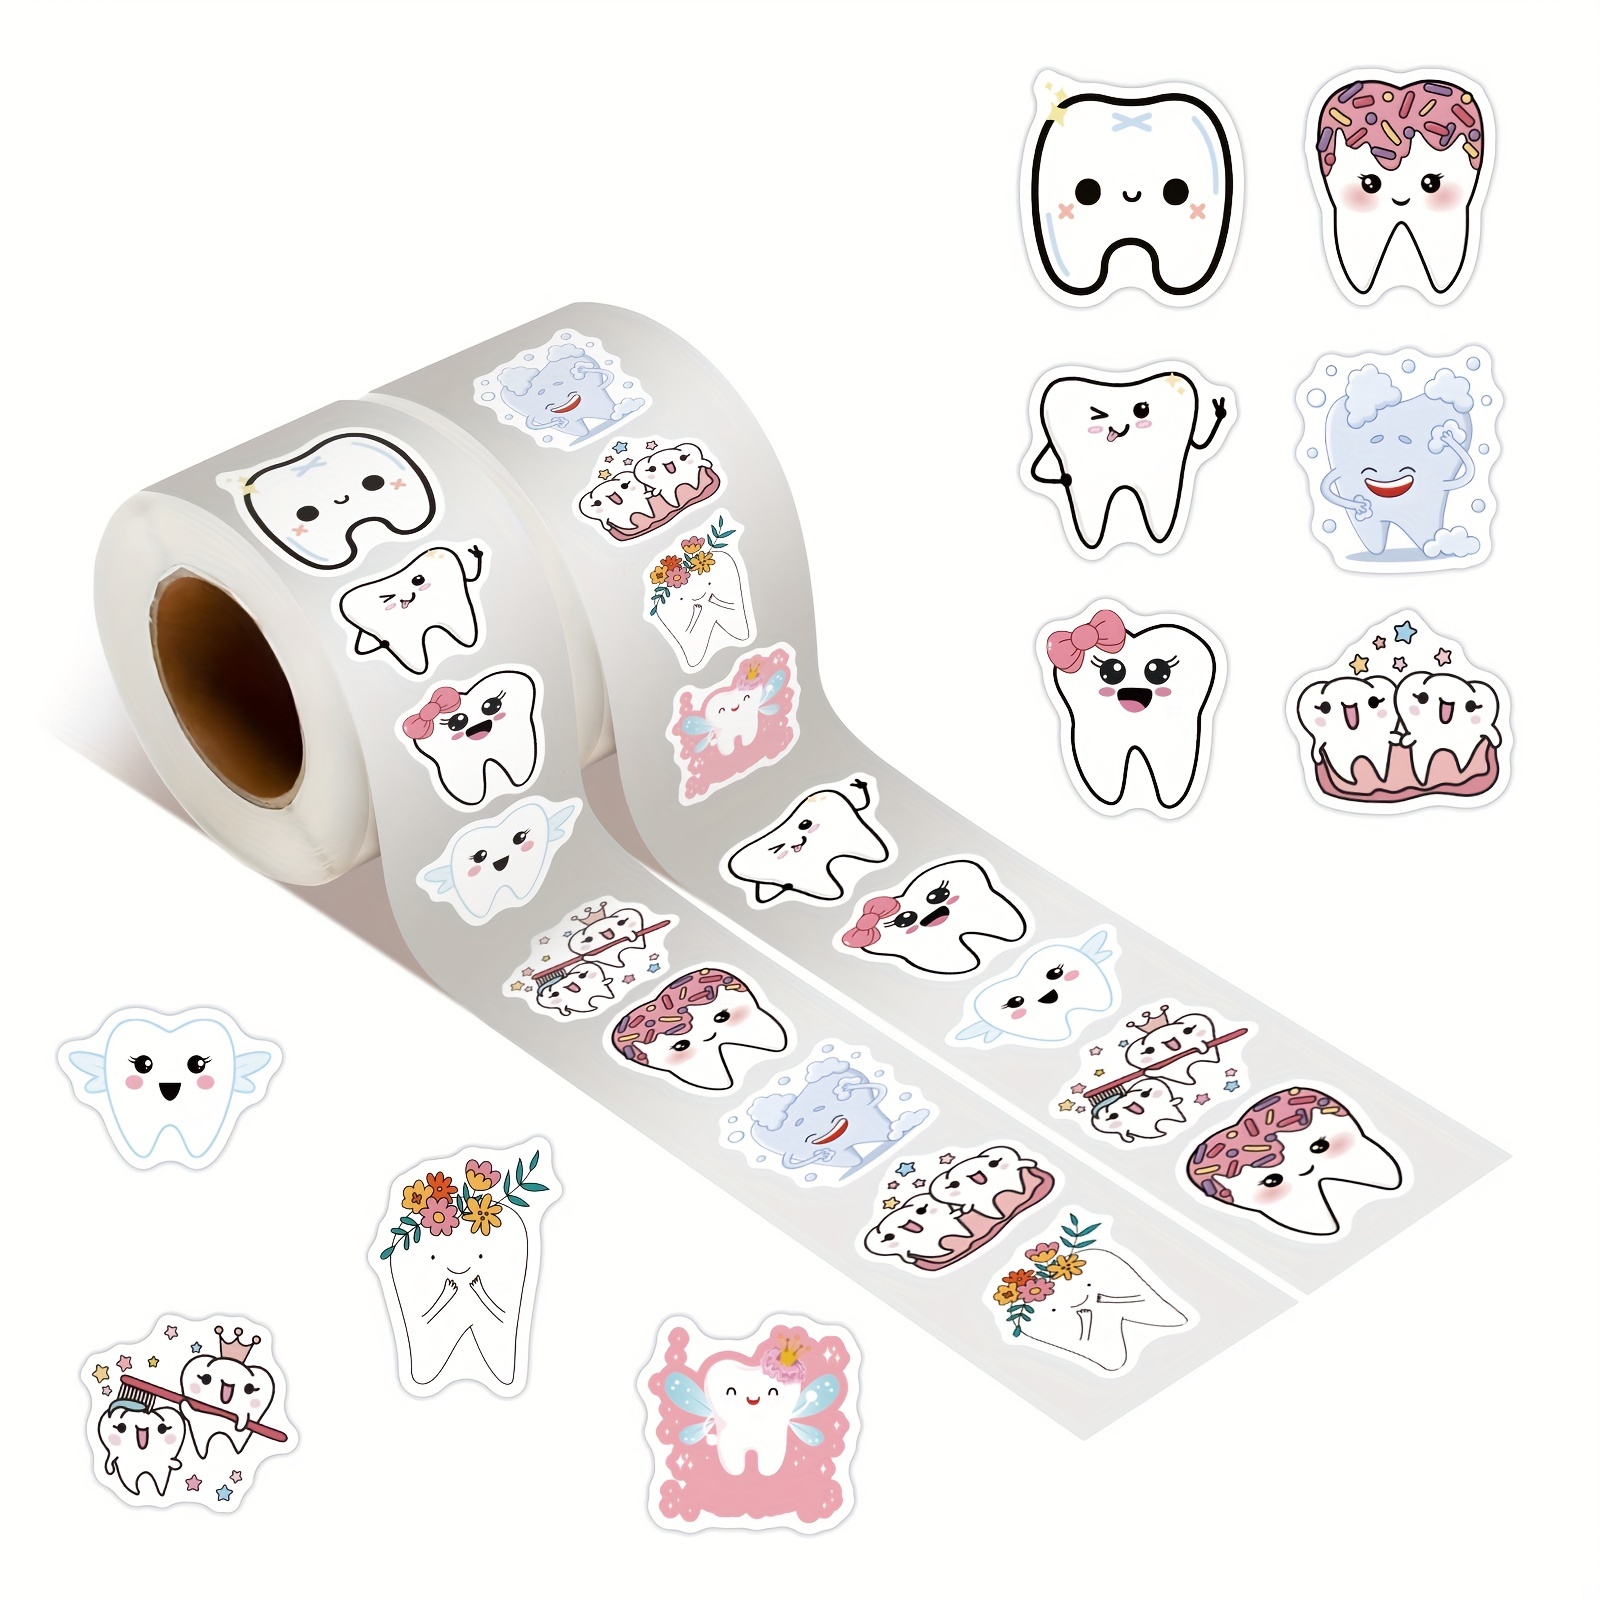 

500pcs Tooth Stickers Roll Dental Stickers Tooth Fairy Stickers Pack Vinyl Waterproof For Water Bottle Laptop Notebook Phone Skateboard Luggage